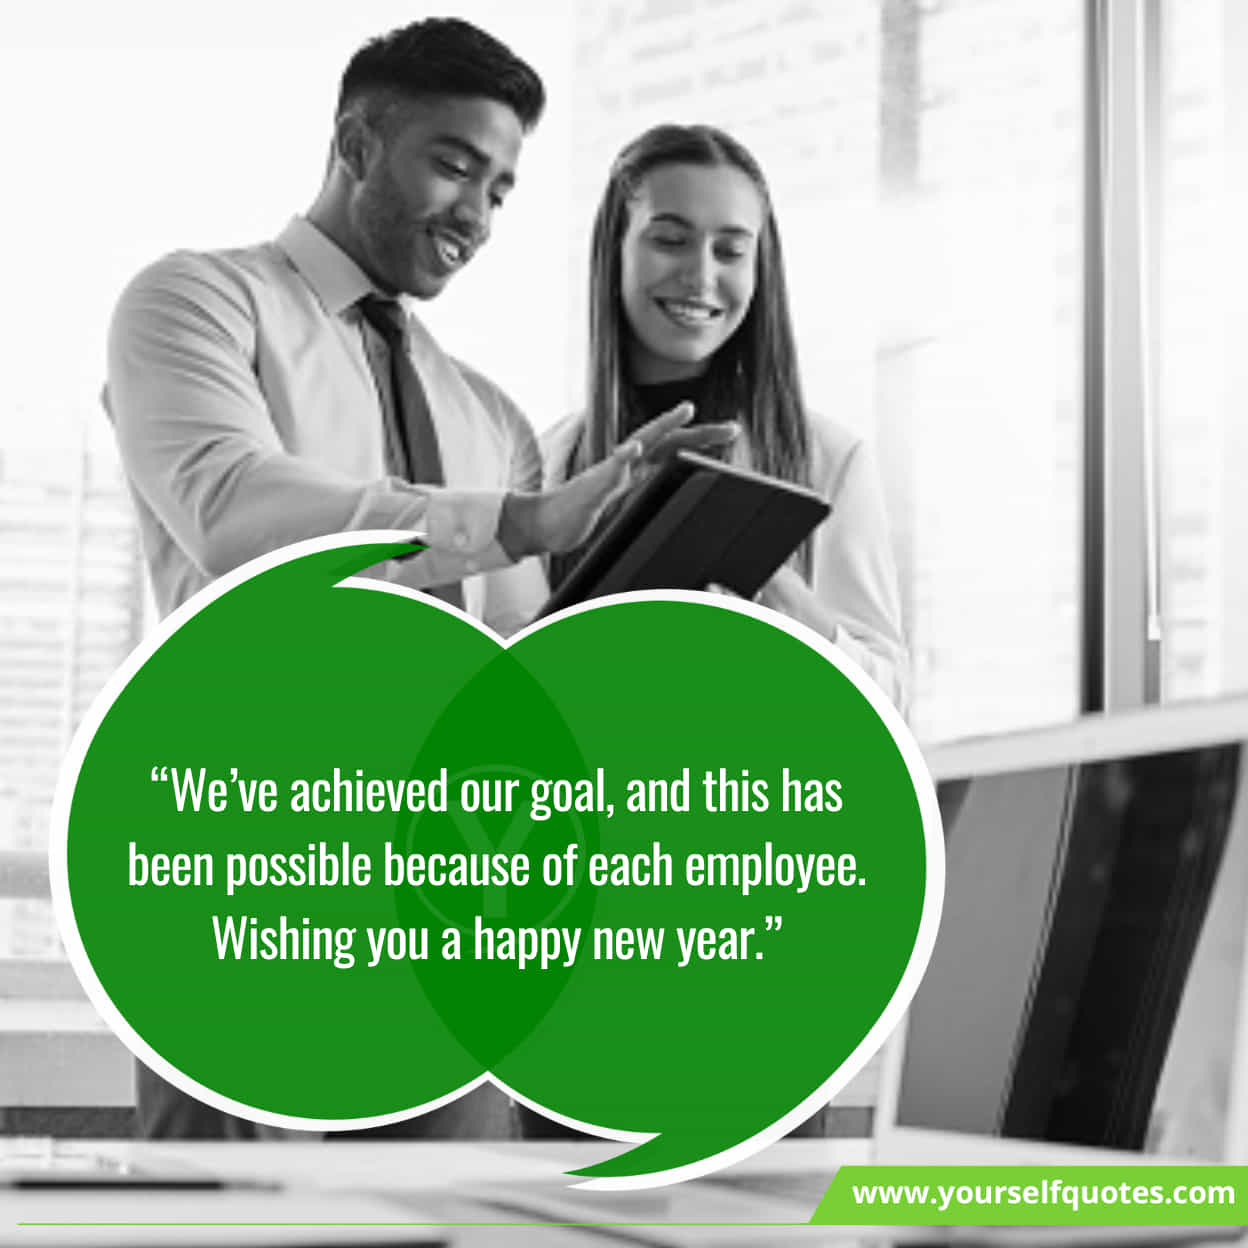 Happy New Year Greetings for Business